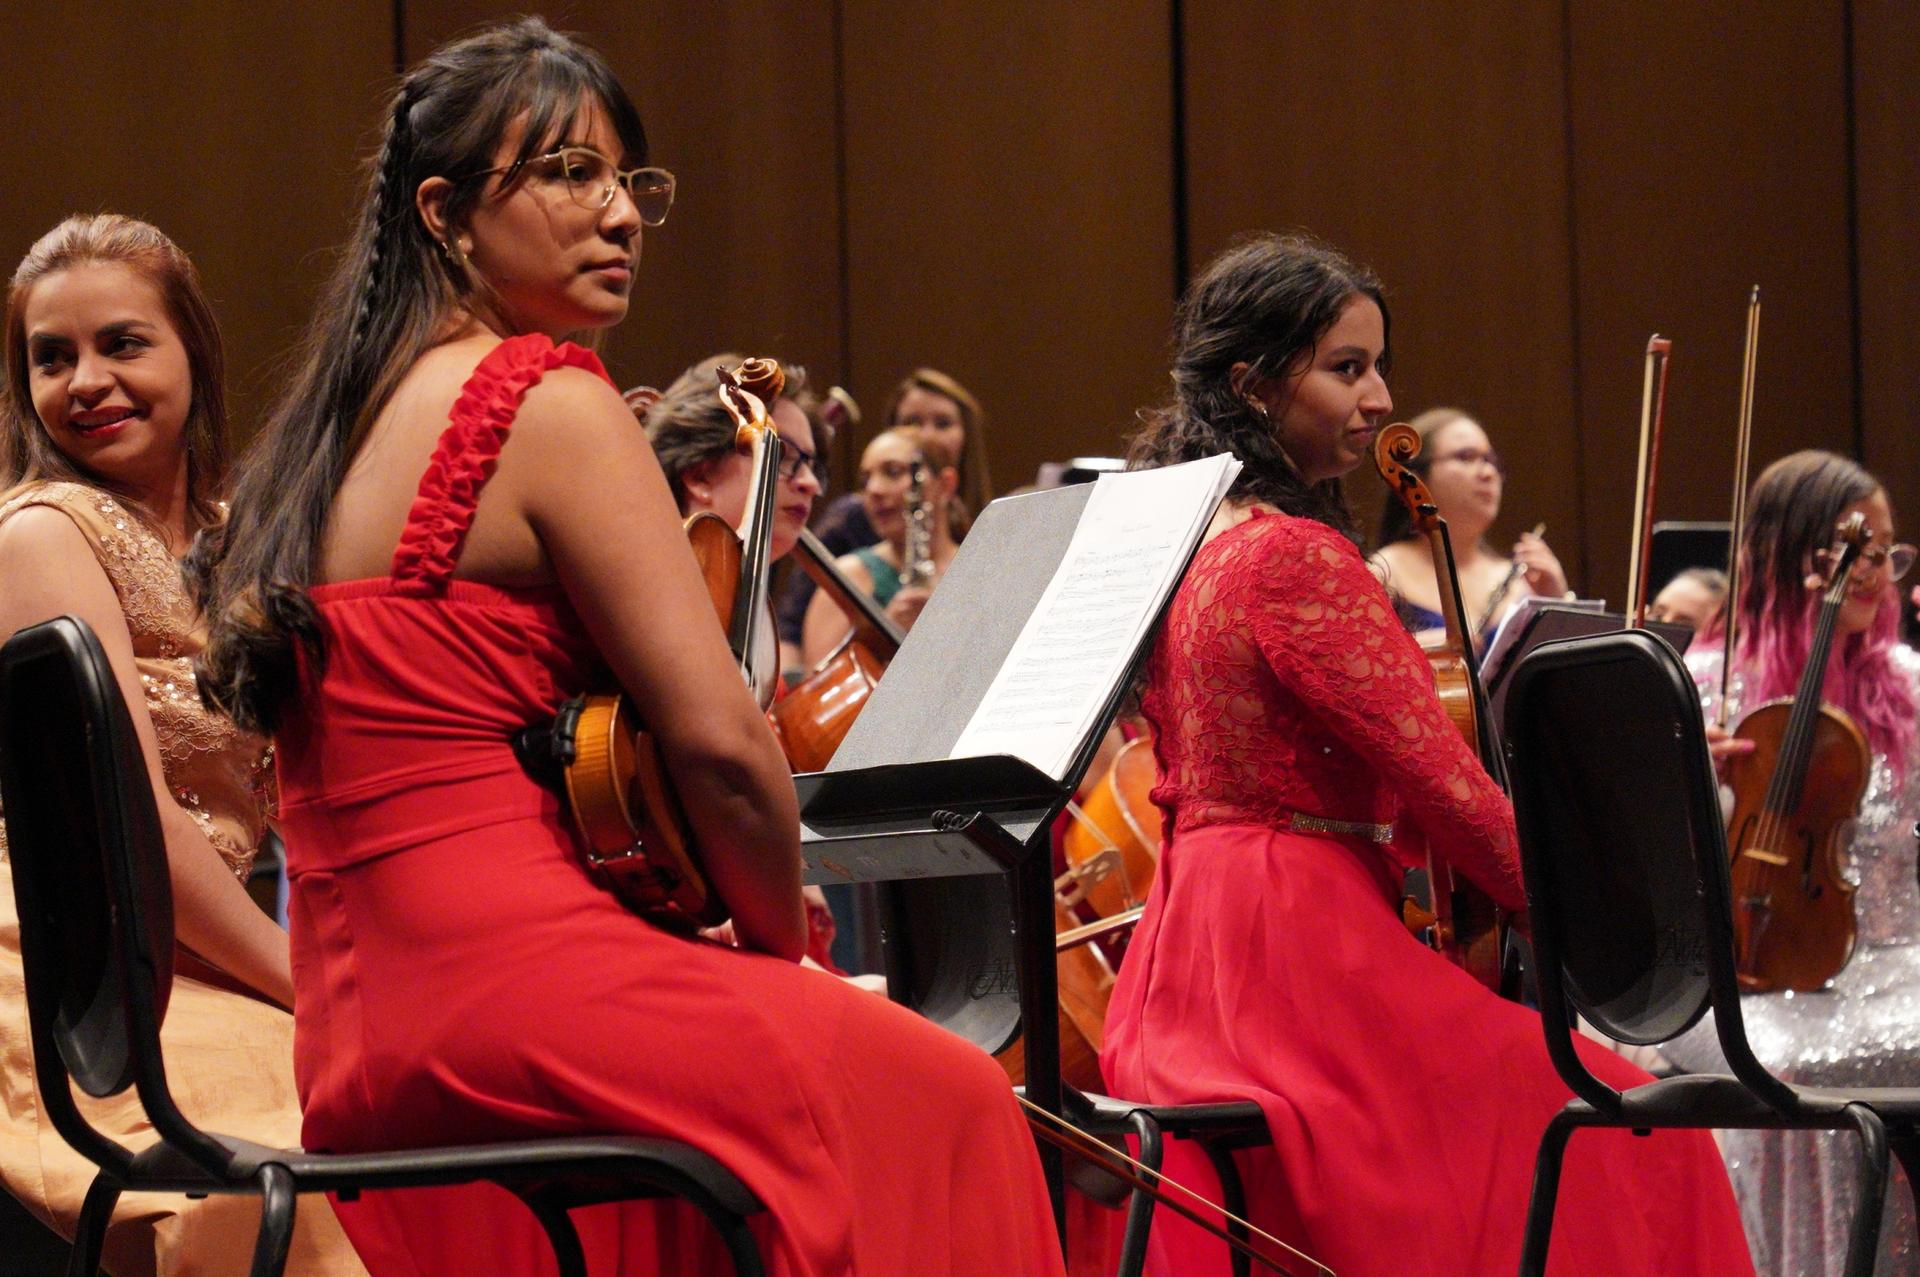 The Bogota Philharmonic Women’s Orchestra gets ready for a show at the Jorge Eliecer Gaitan theater in Bogotá, Colombia